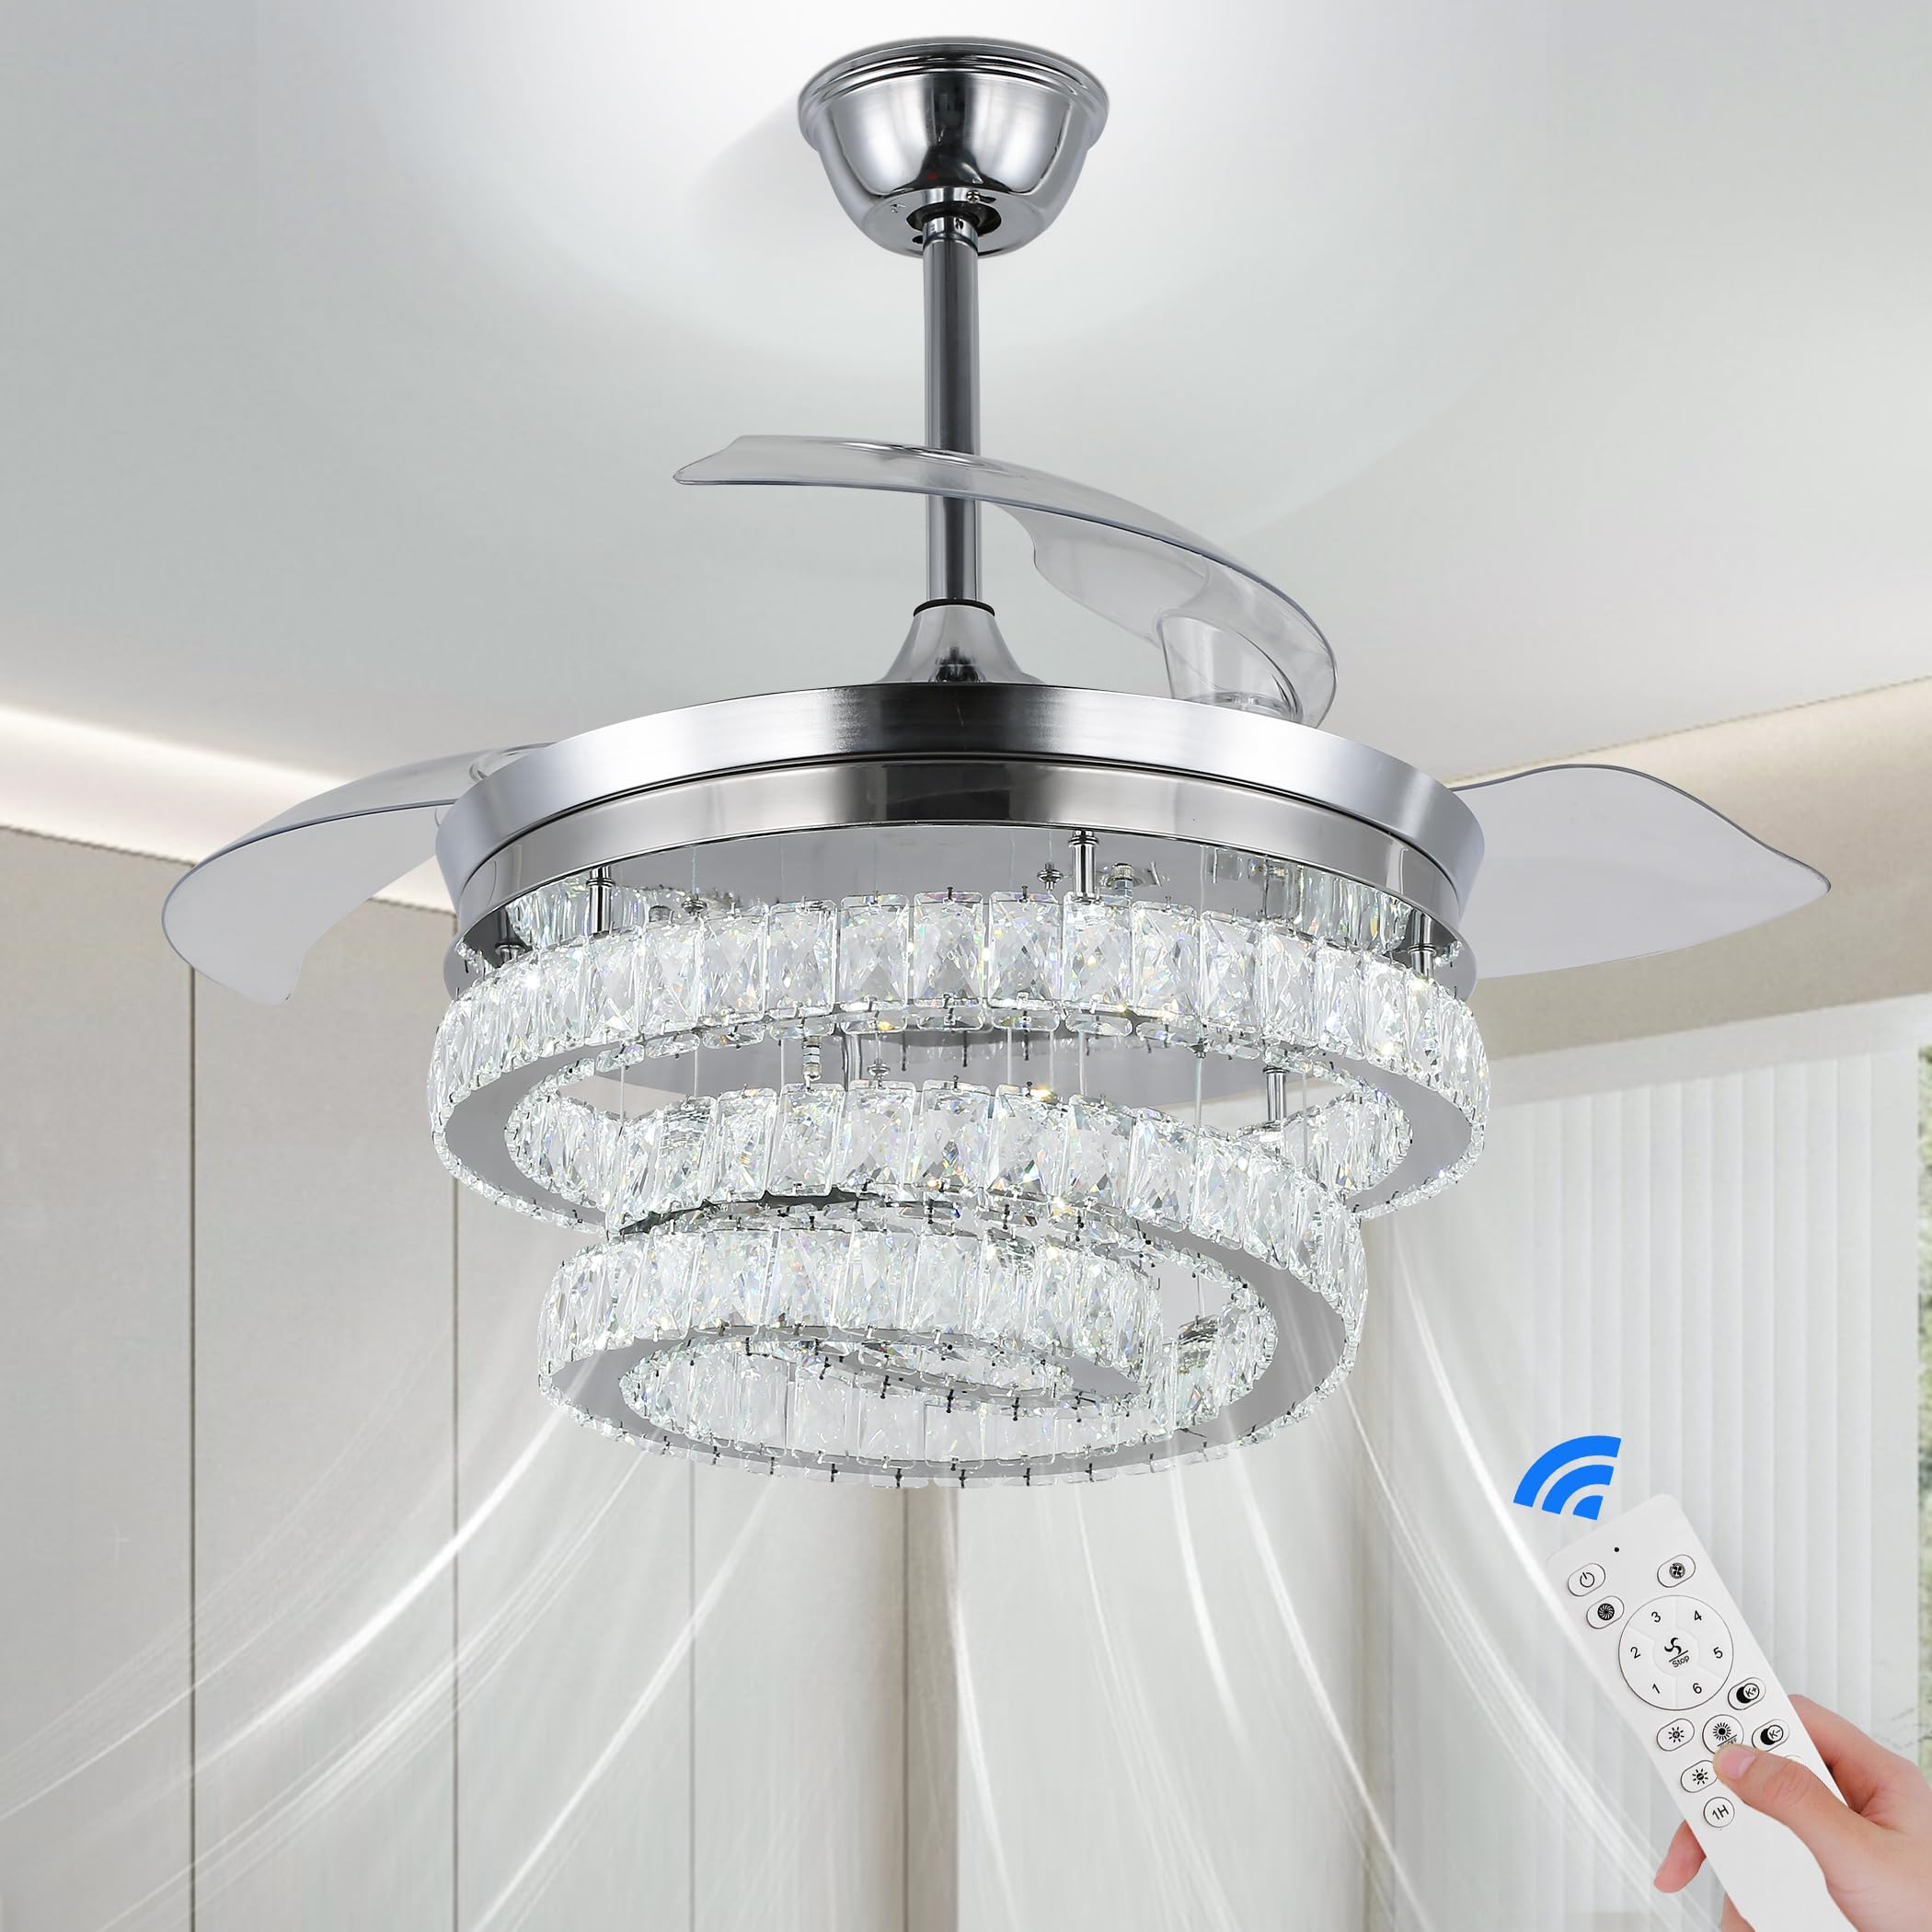 42'' Dimmable Fandelier Modern Crystal Chandelier Ceiling Fan Retractable LED Ceiling Fandeliers with Light and Remote 6-Speed, APP & Memory Function Ceiling Fans for Bedroom